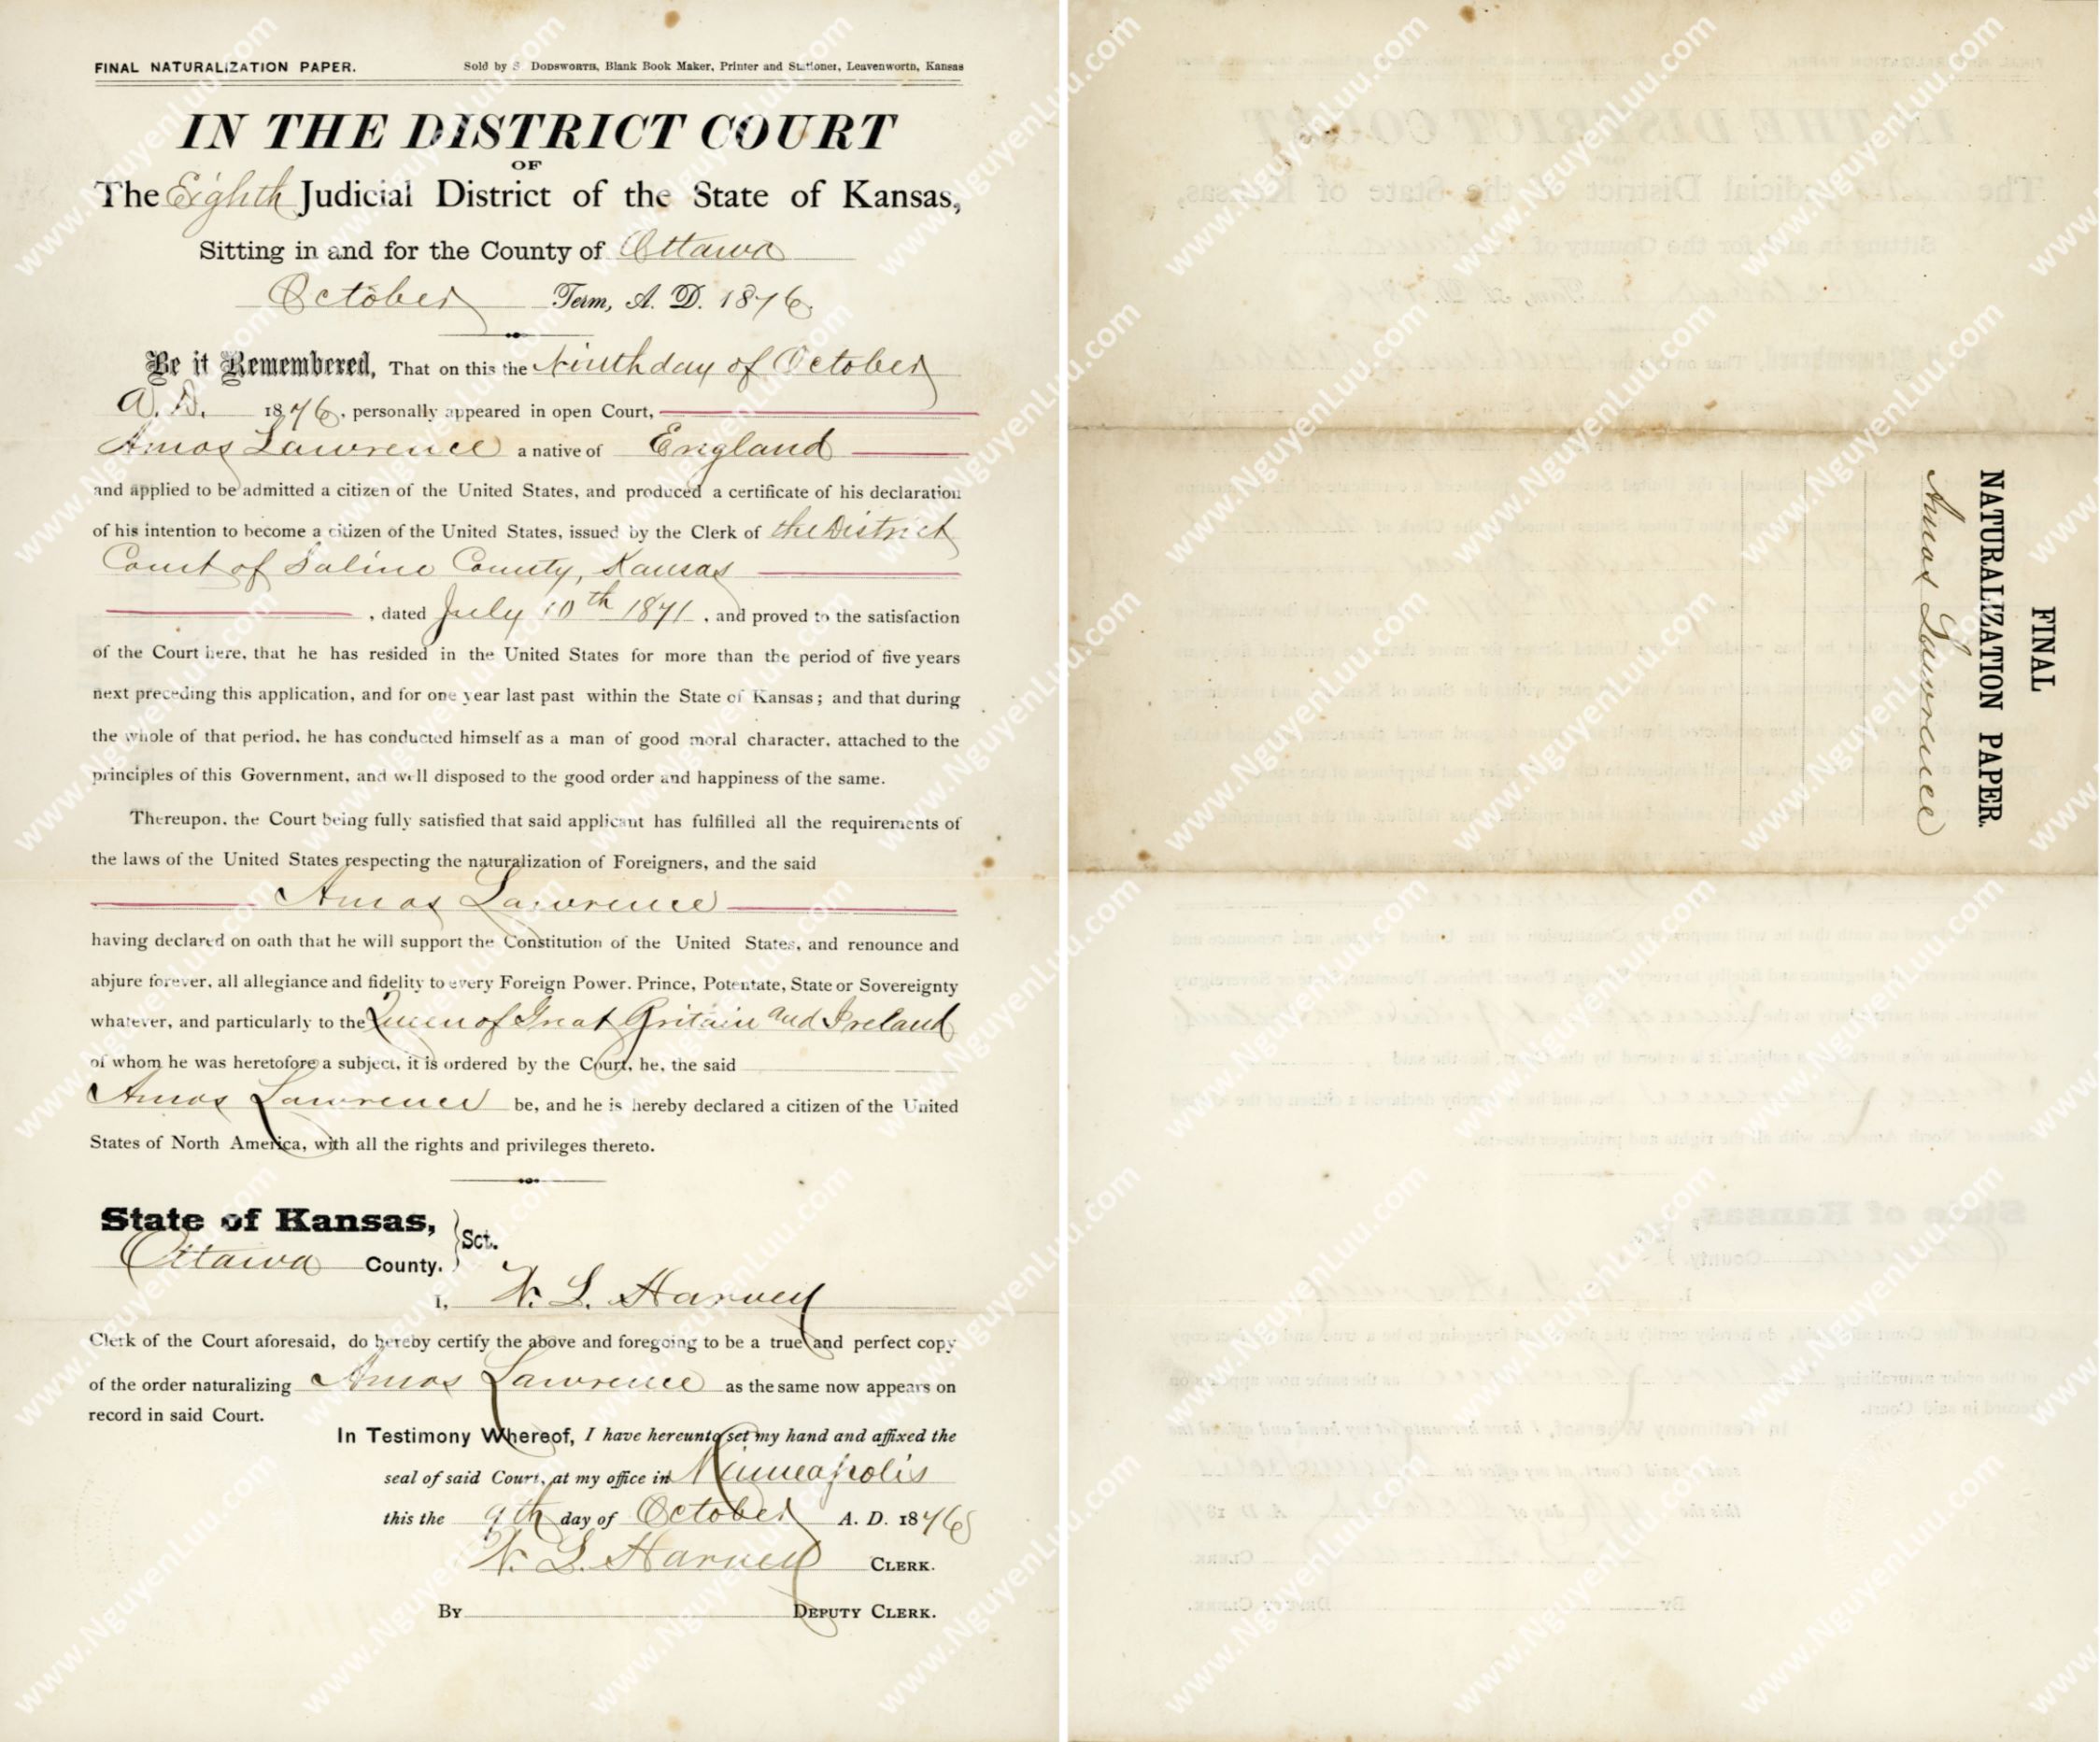 U.S. Certificate of Citizenship issued in the State of Kansas in 1876